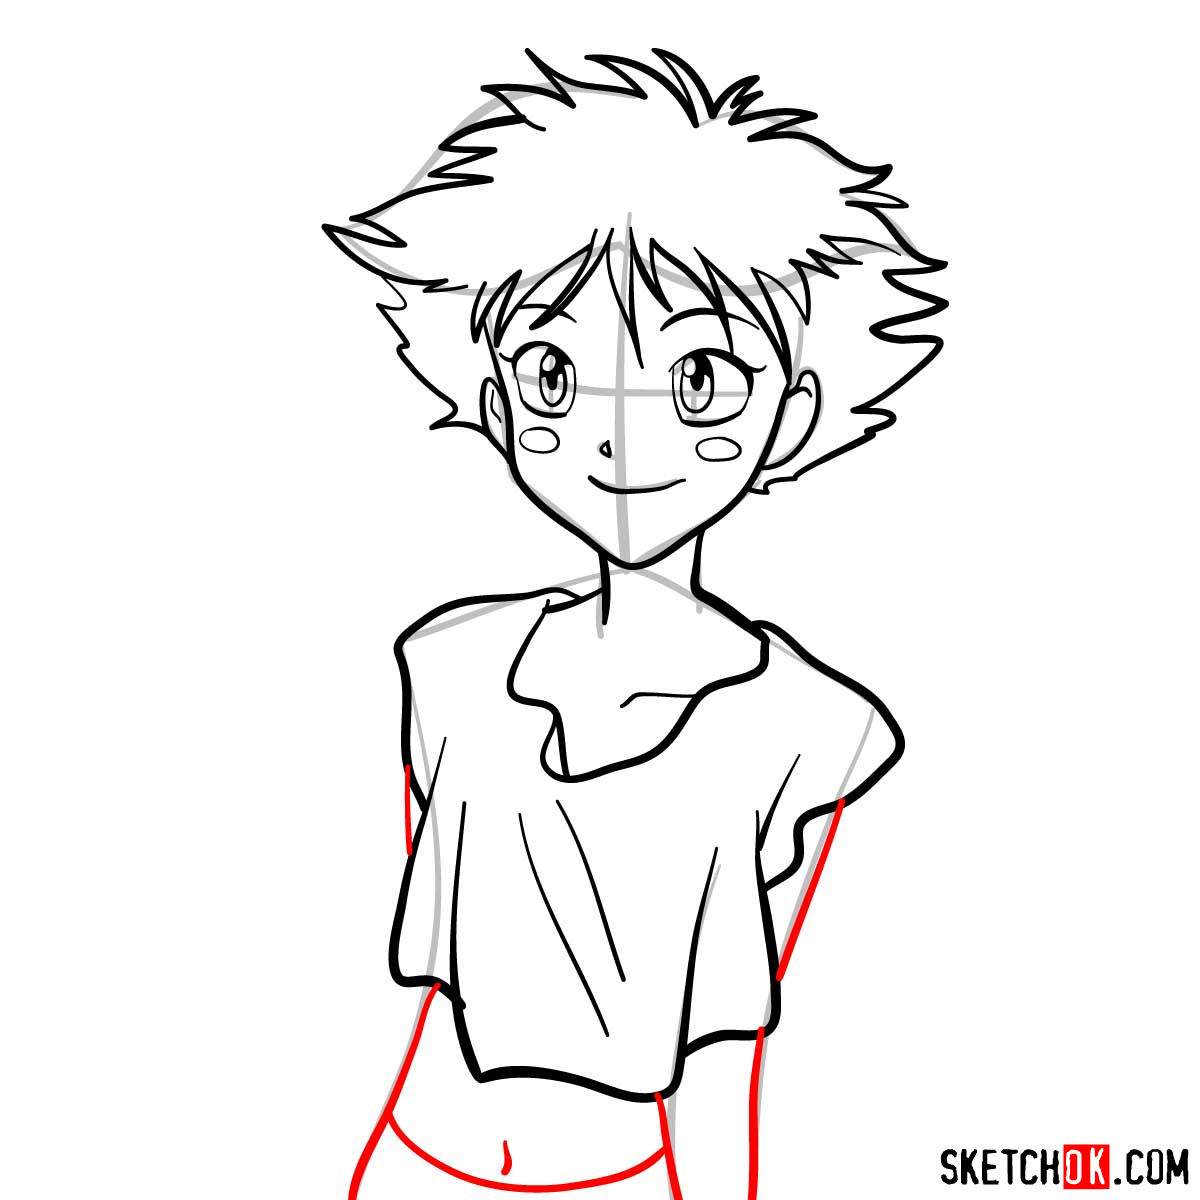 How to draw Ed from Cowboy Bebop anime - step 08